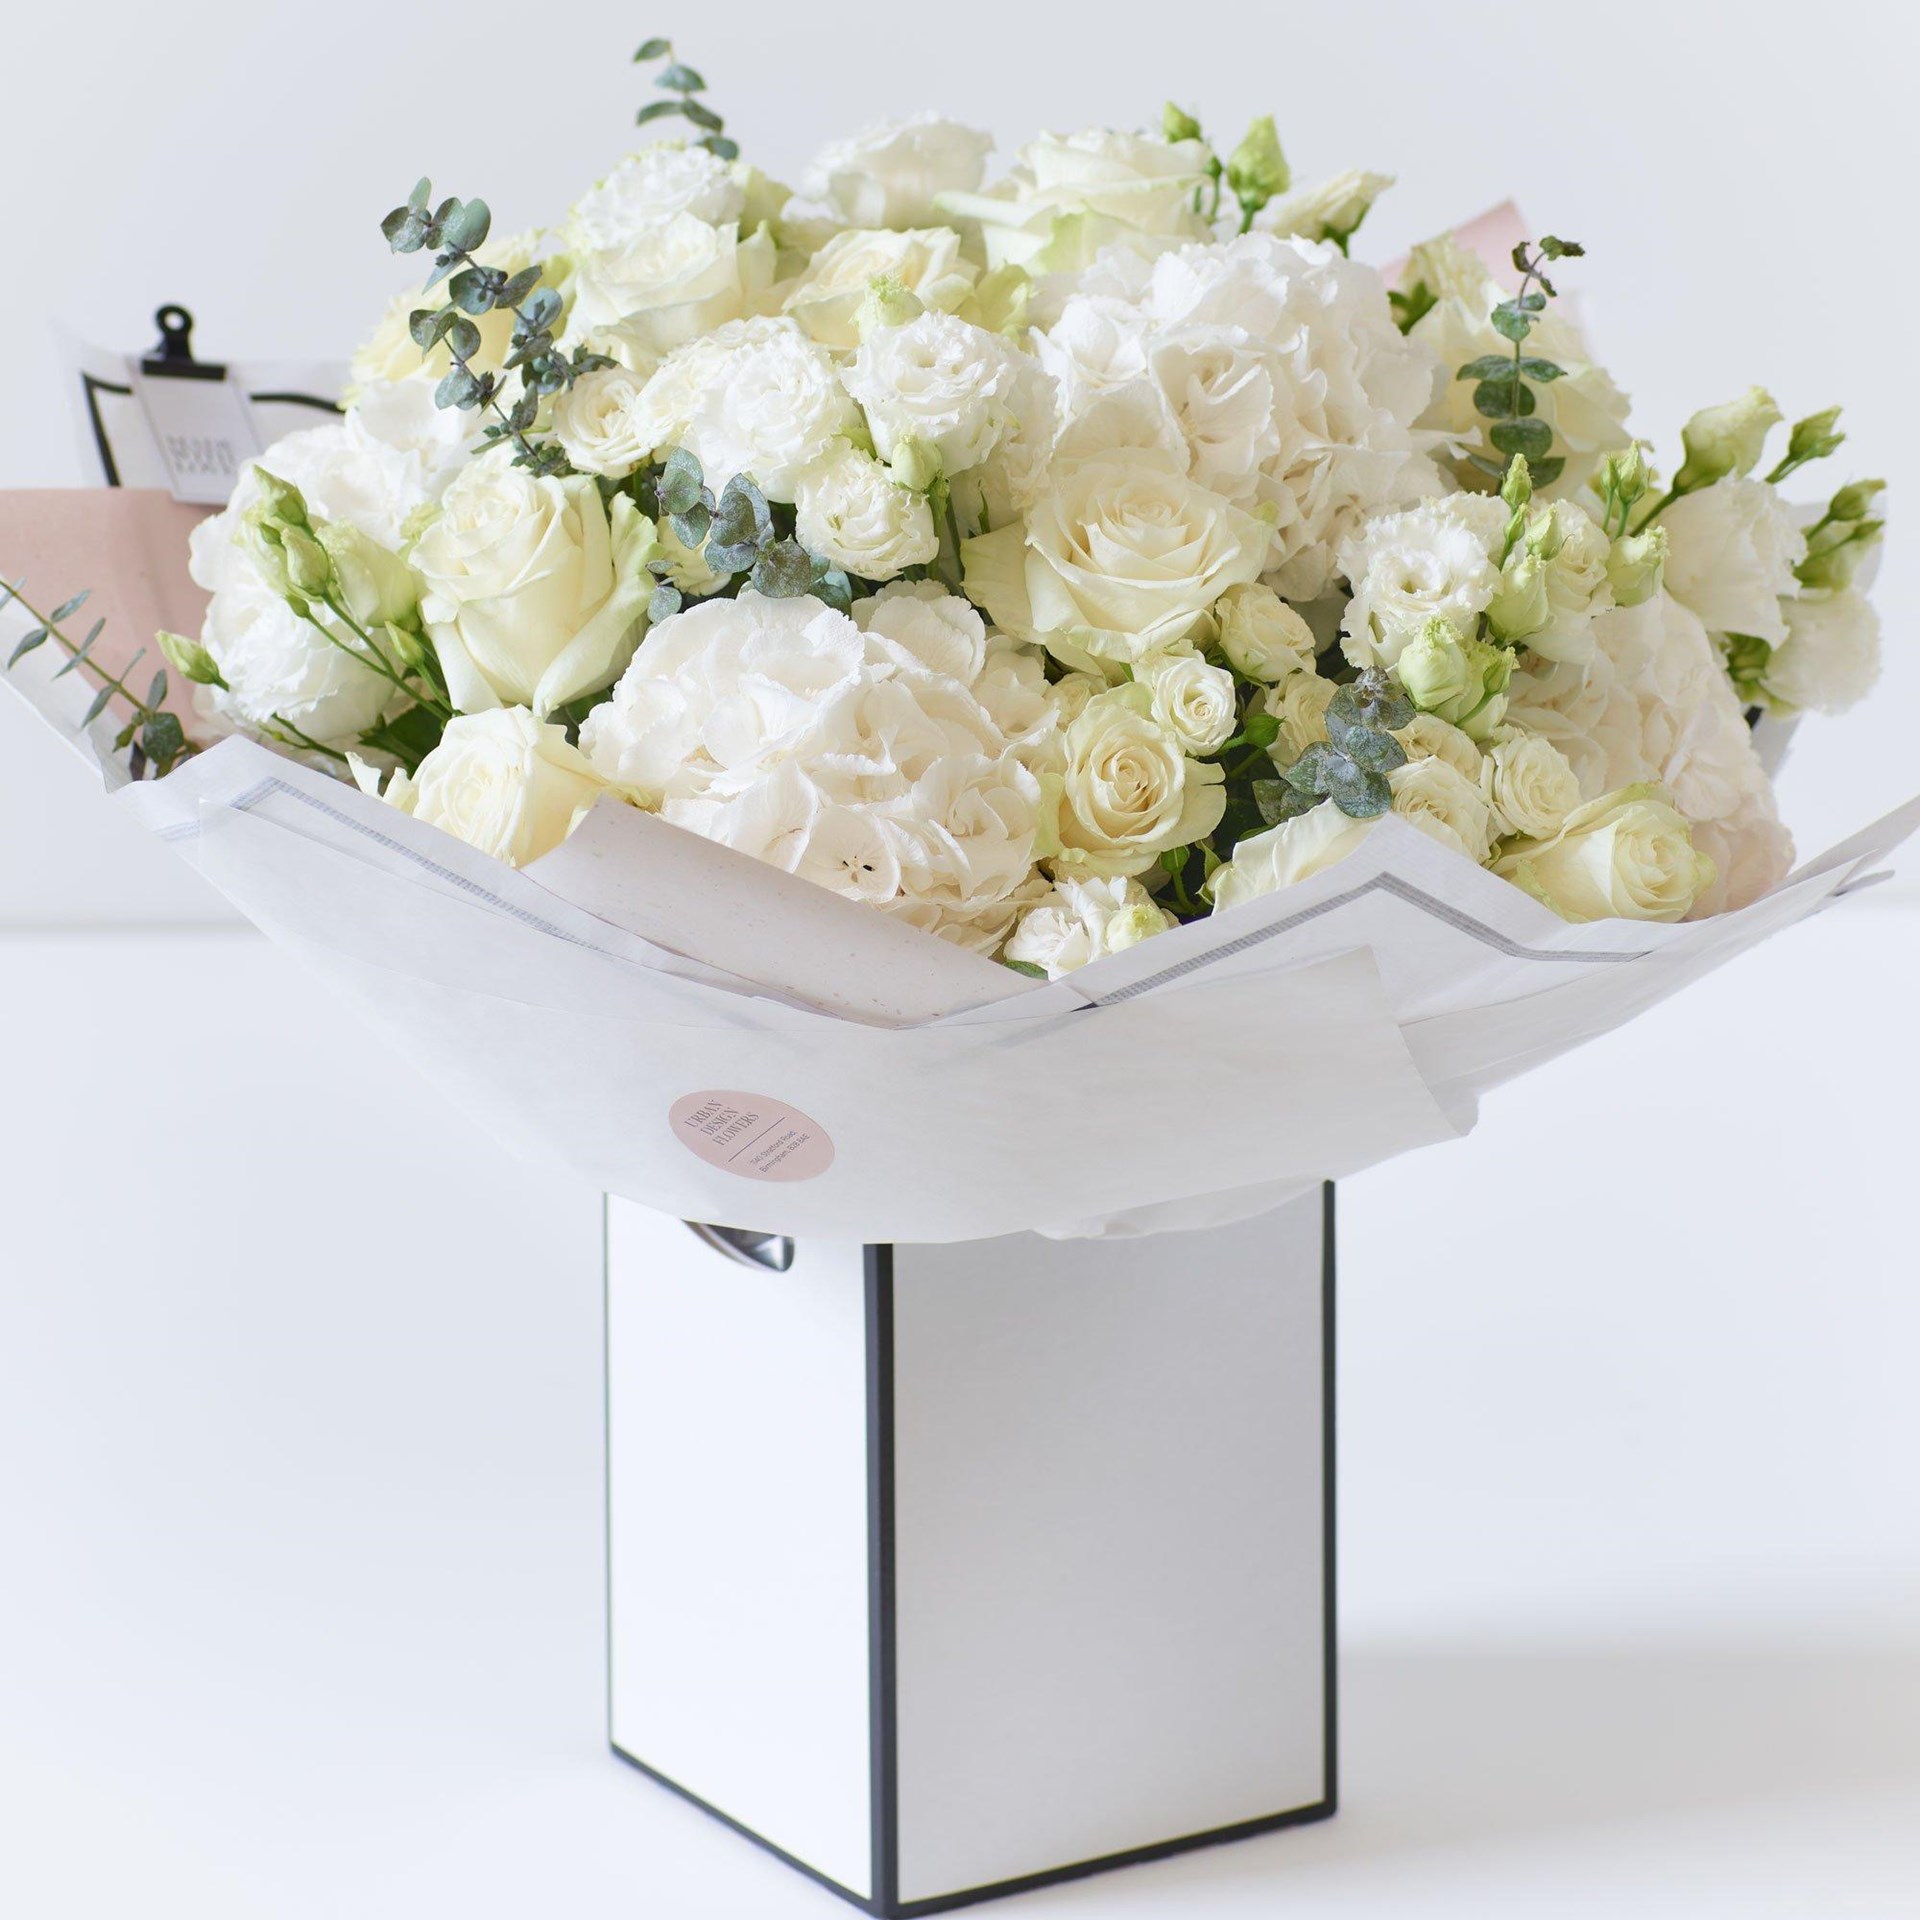 product image for Beautifully Simple Showstopper White Flower Bouquet.